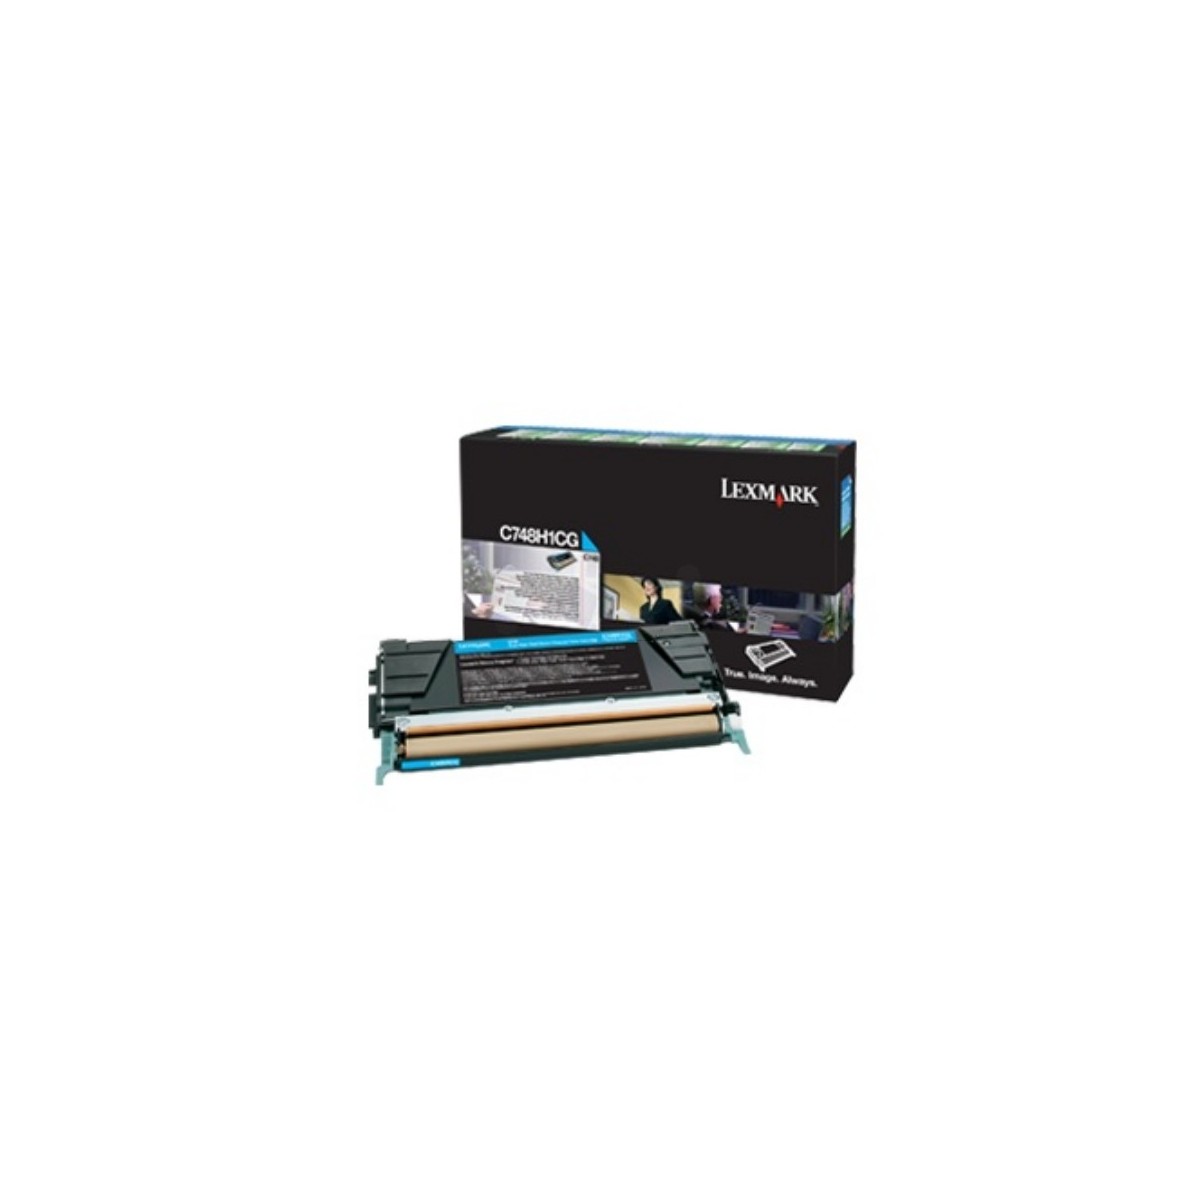 Lexmark C748H3CG - 10000 pages - Cyan - 1 pc(s)